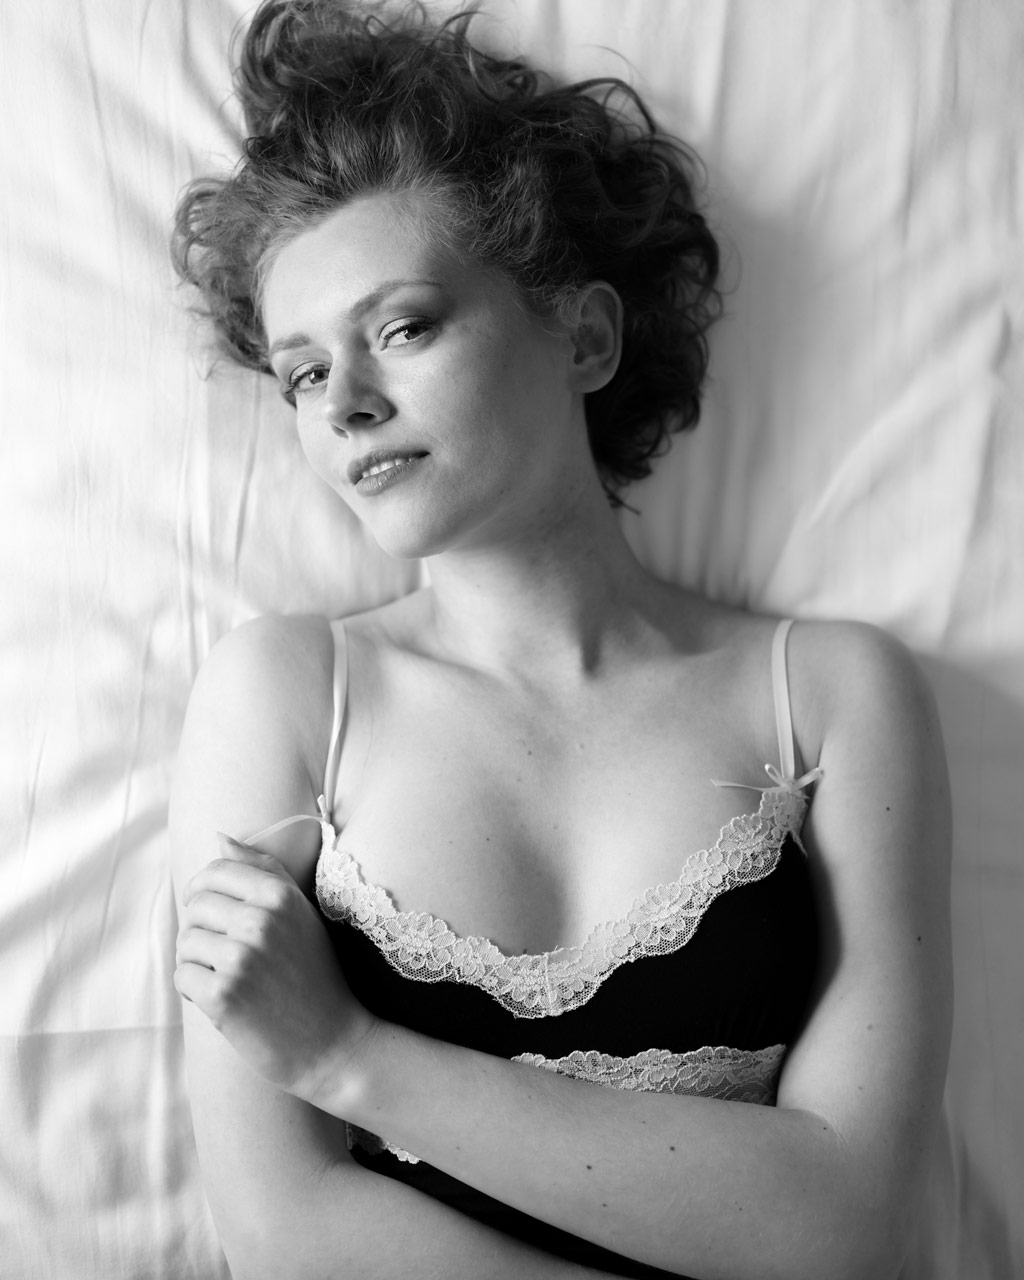 Get started with boudoir photography pic